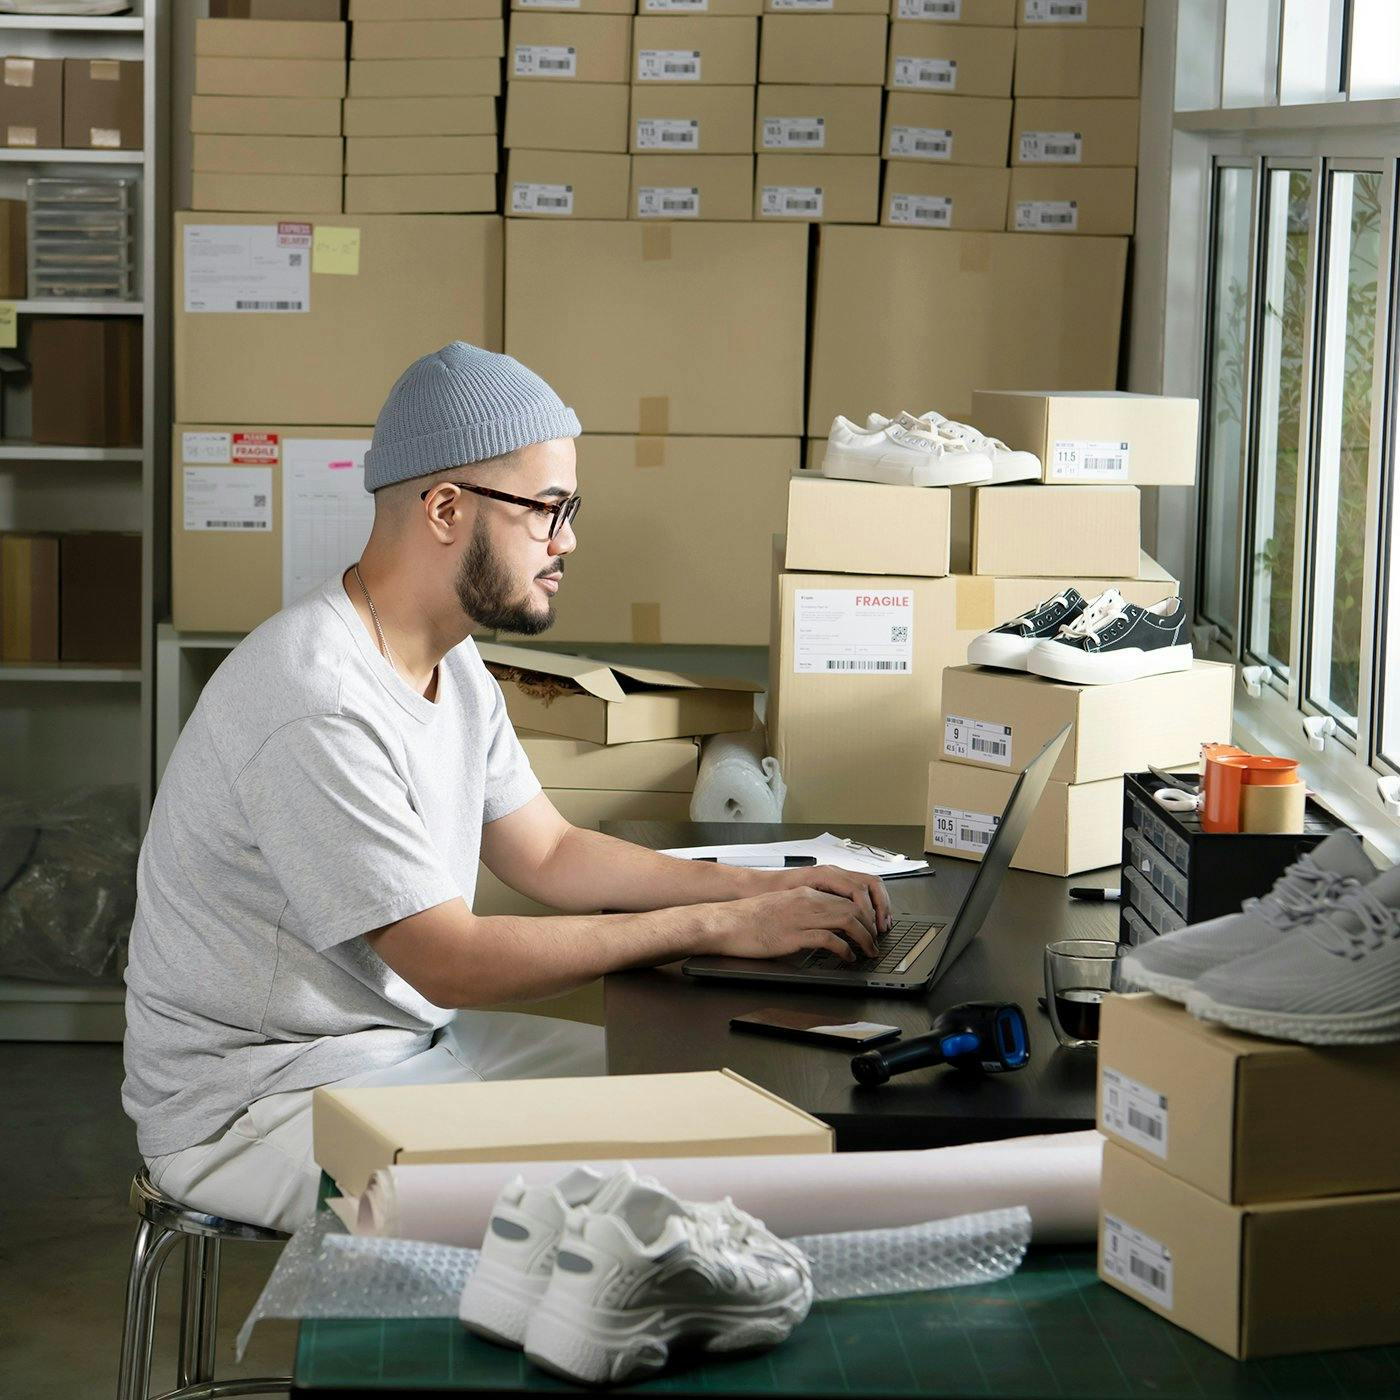 A man working on a laptop in a shipping room